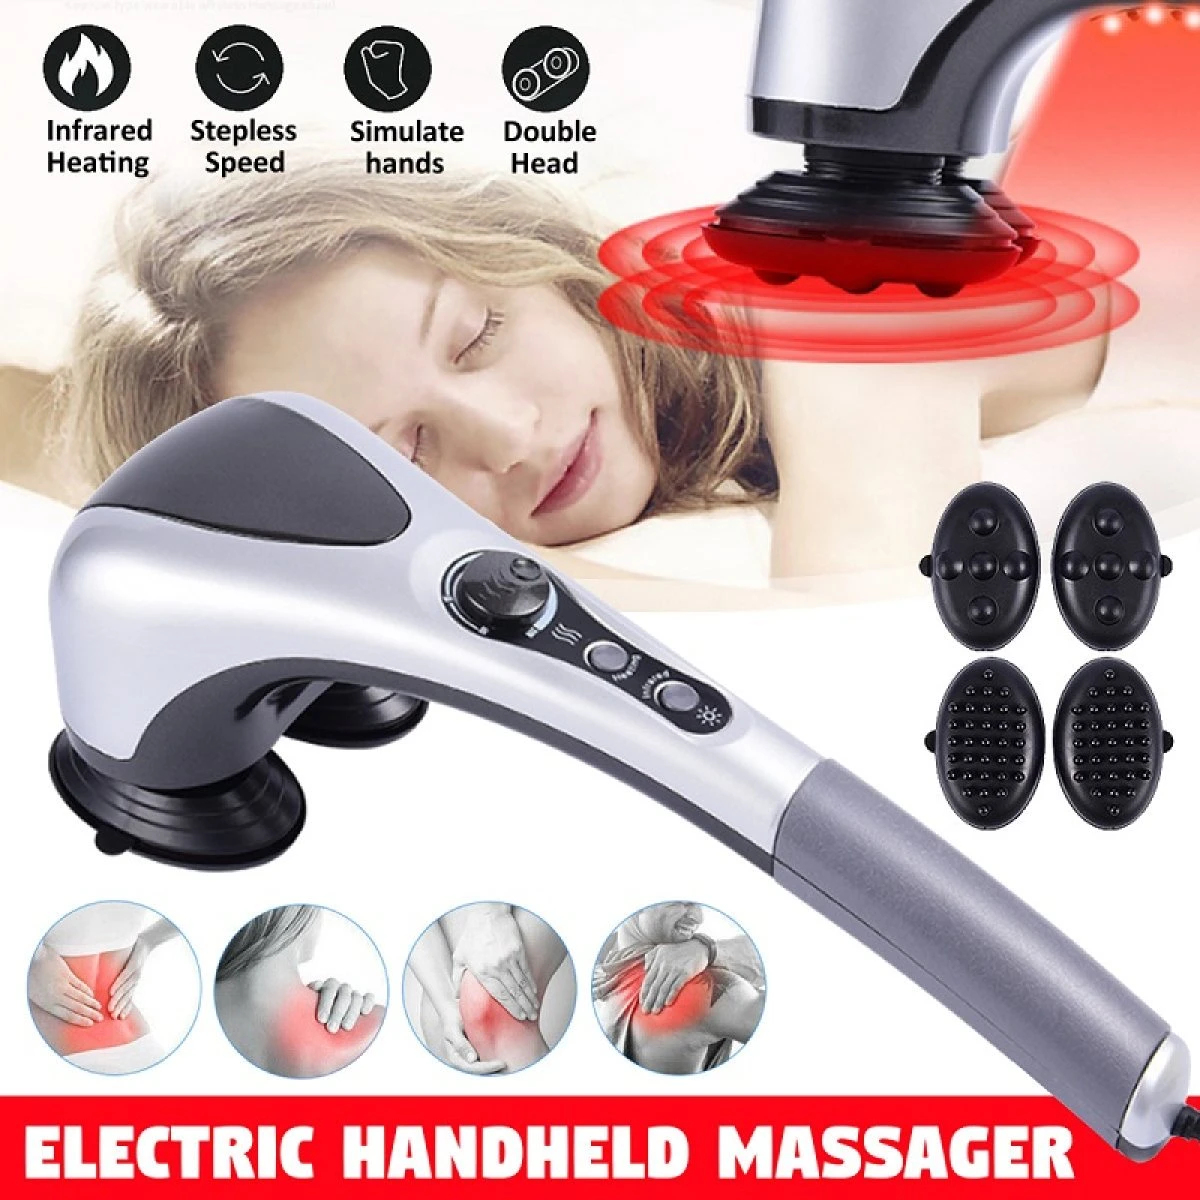 Double Heads Body Massager with Vibration and Heat